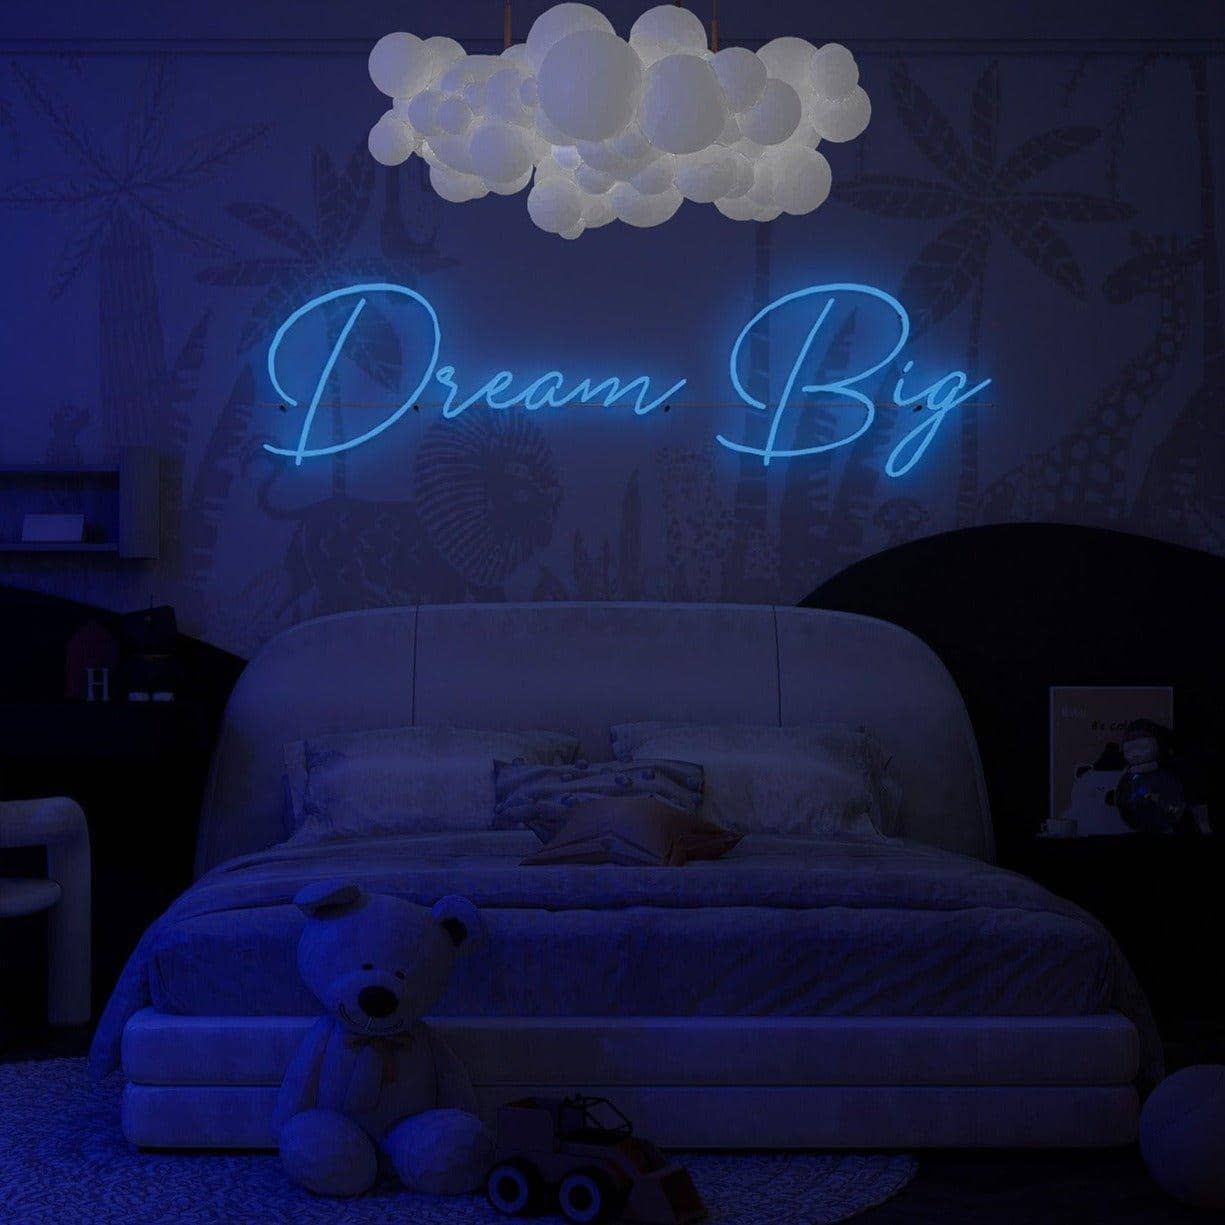 light-up-blue-neon-lights-in-the-dark-night-for-display-in-the-bedroom-dream-big